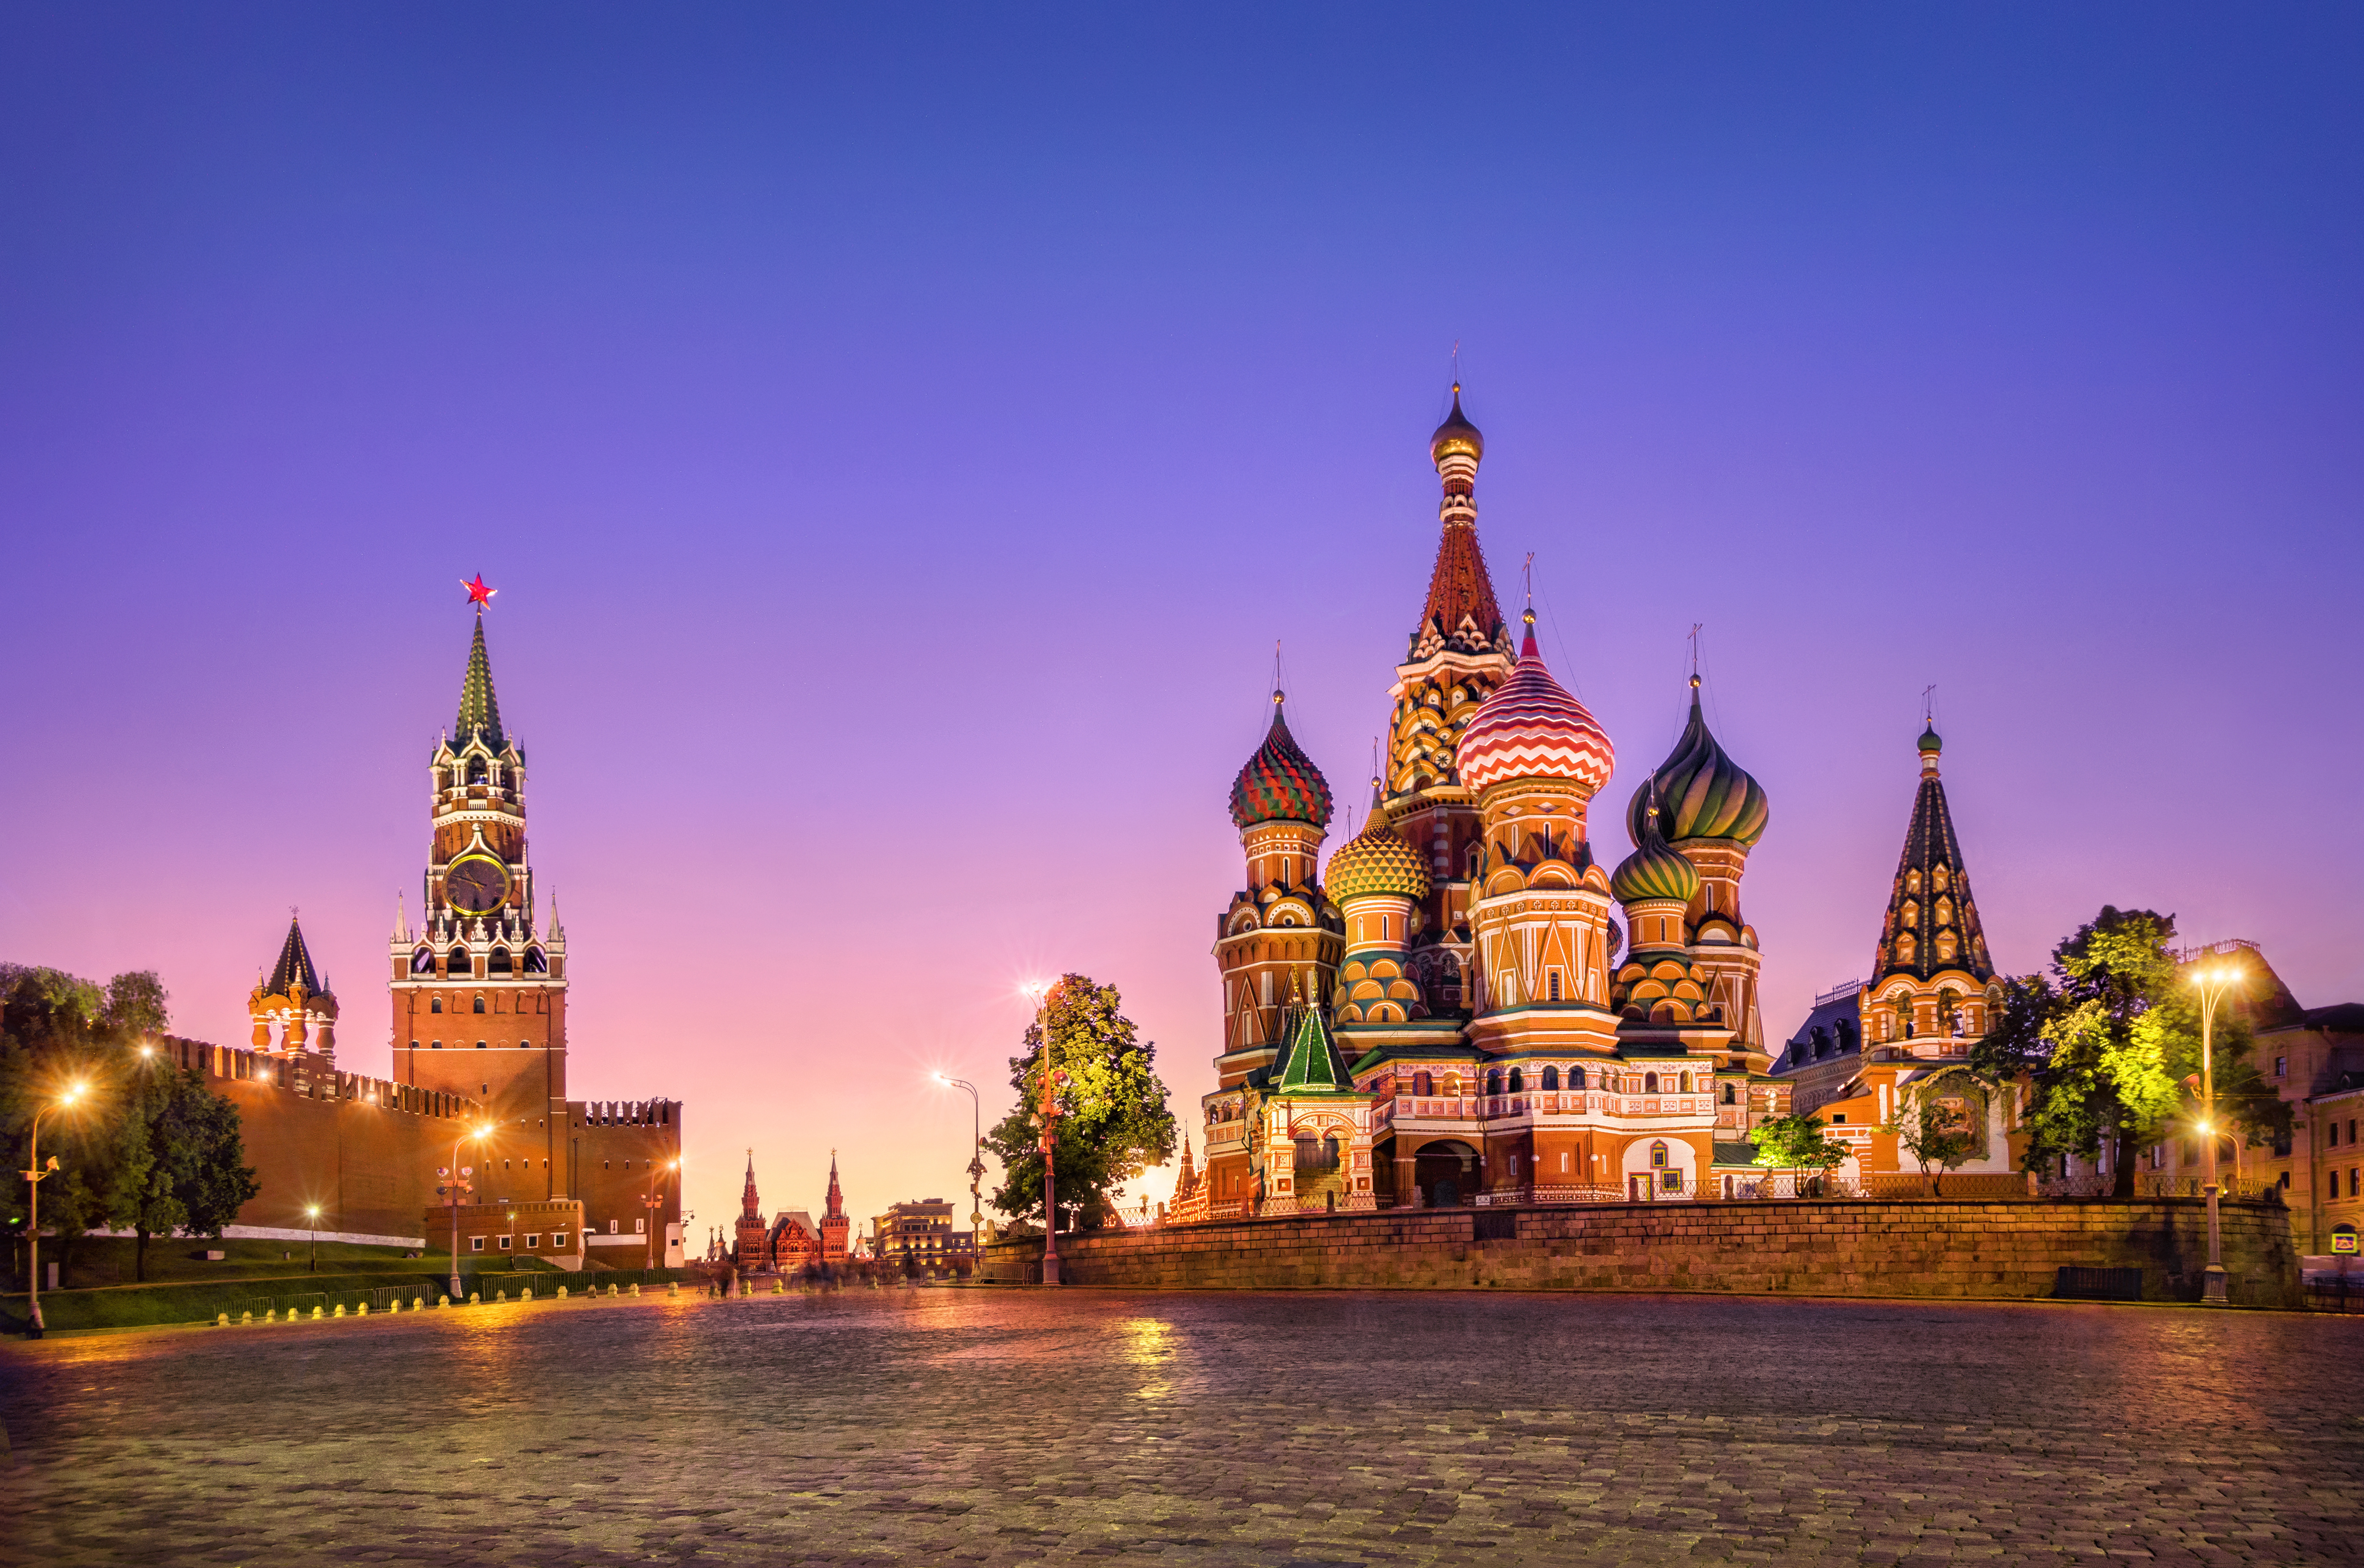 St. Basil's Cathedral and Spasskaya tower at sunset